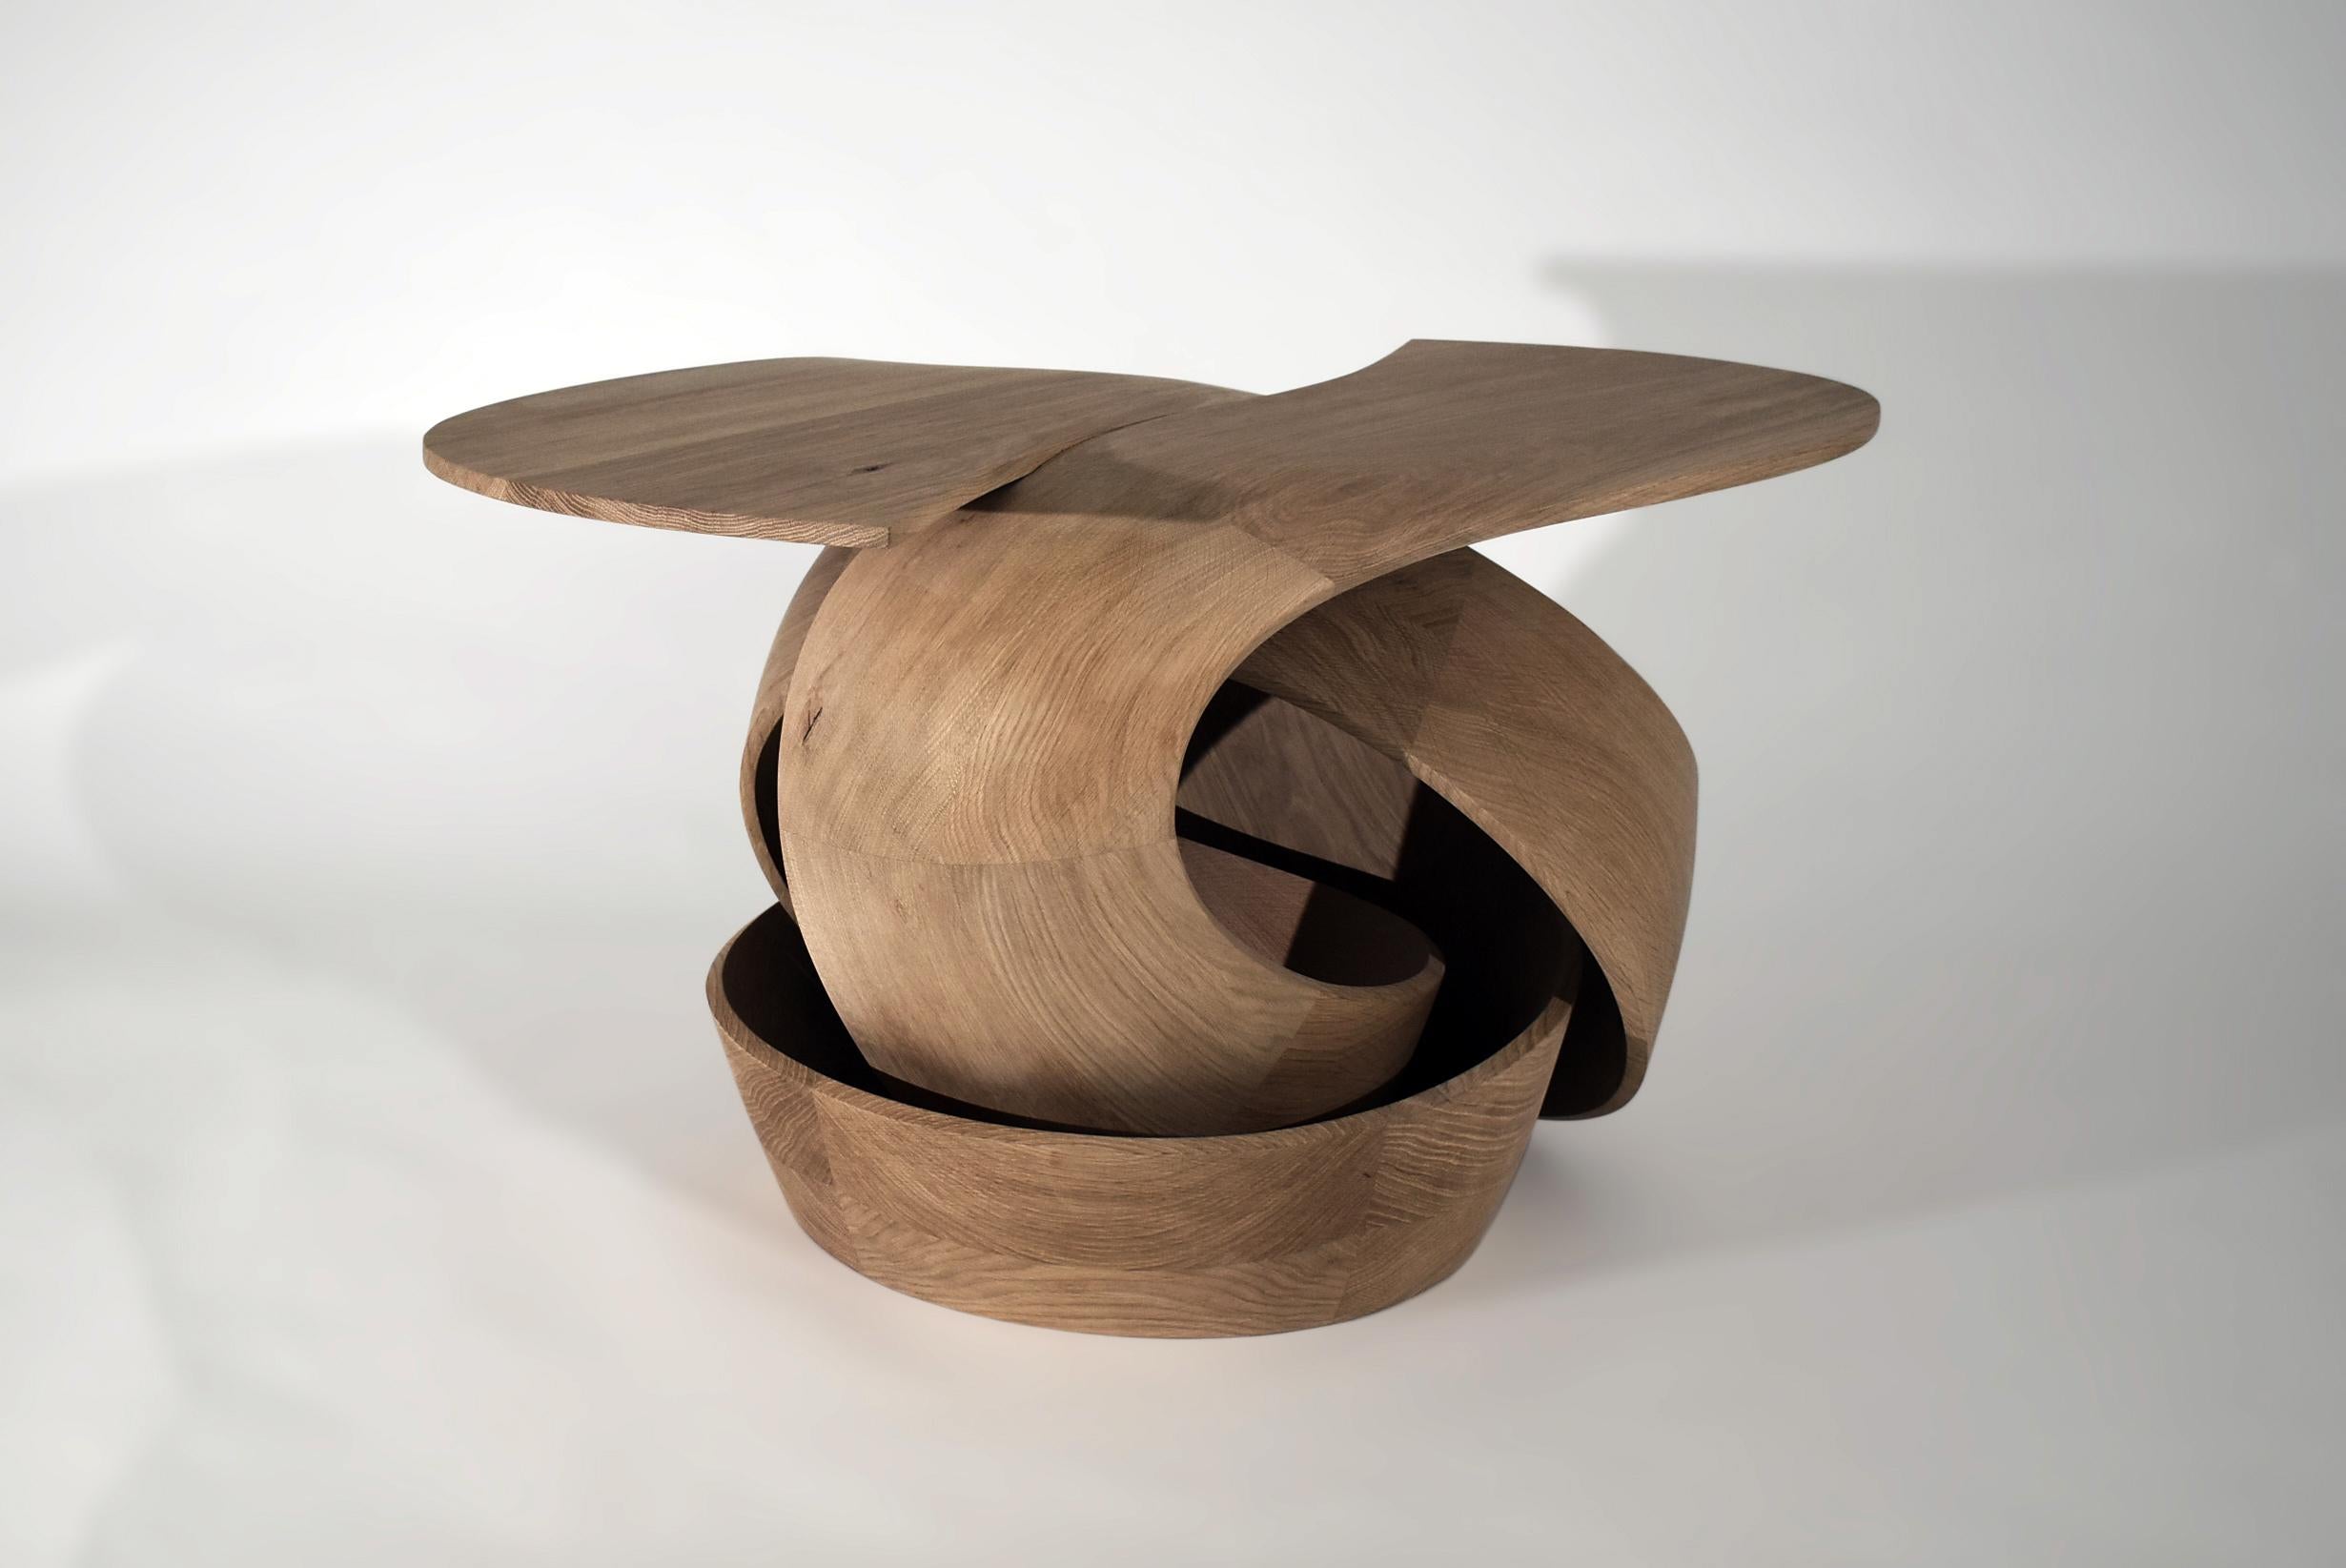 British Sculptural 'knotted' side and/or coffee table in fumed oak by a master maker